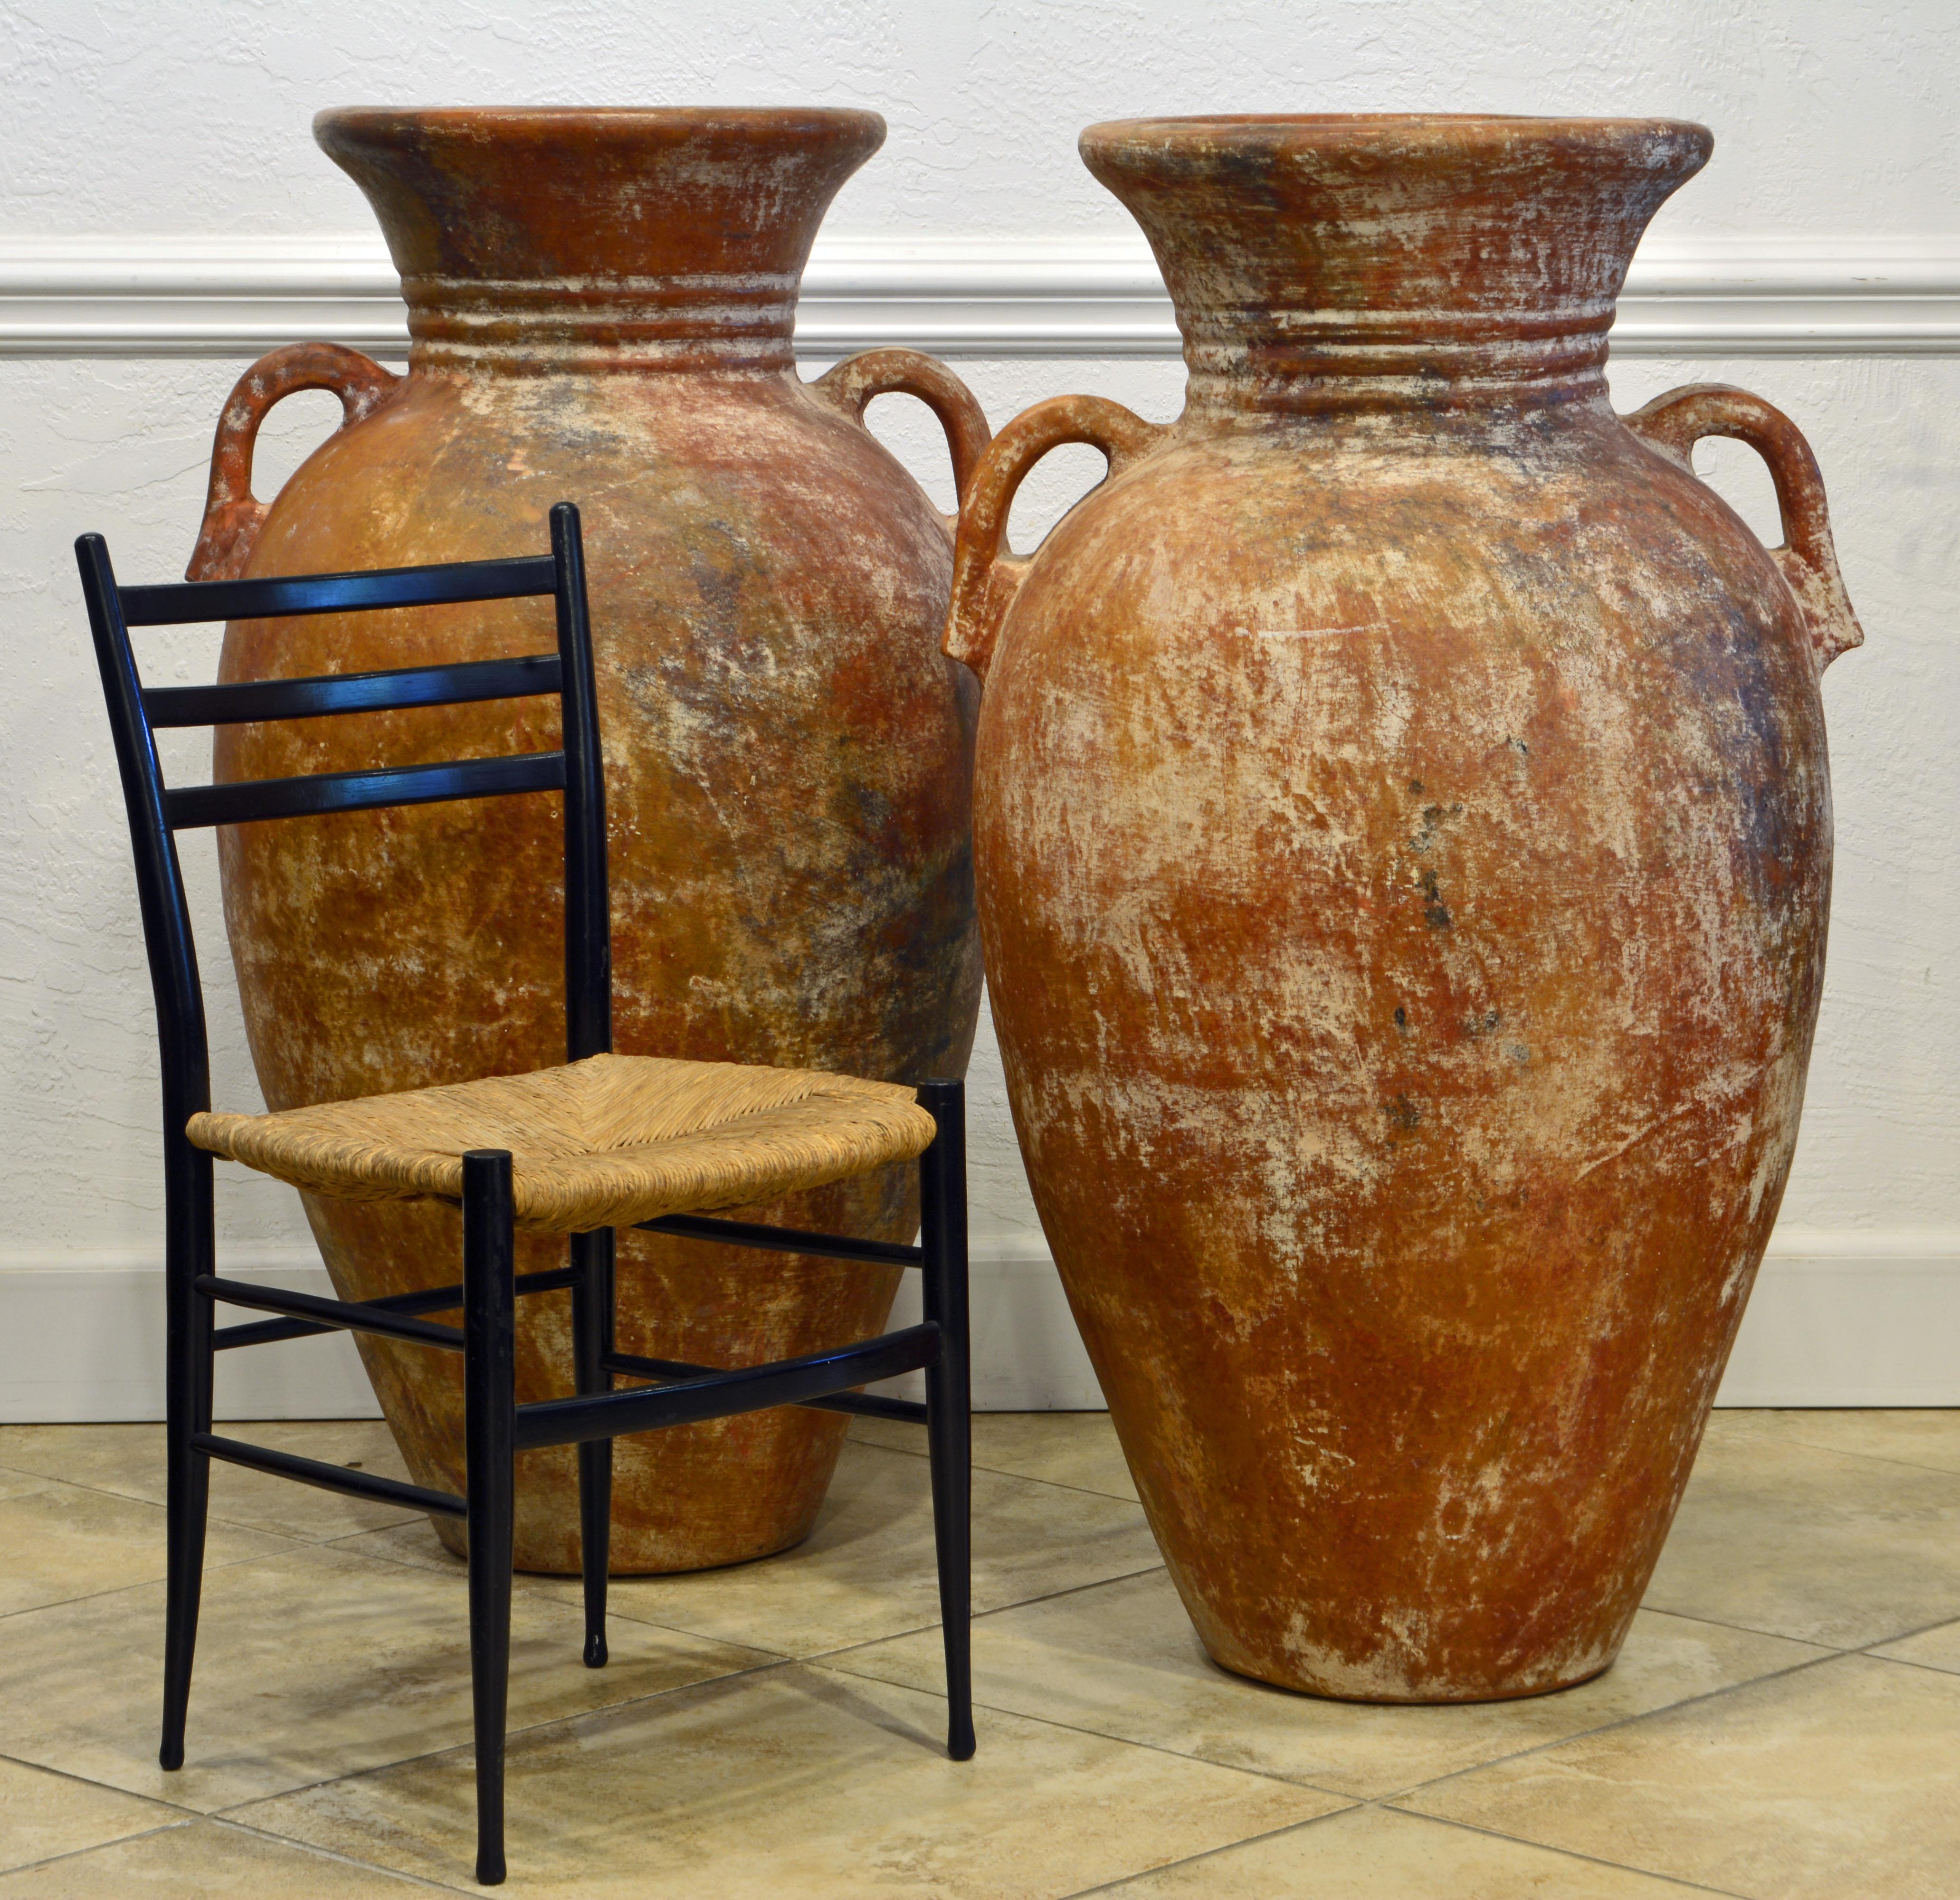 Standing 43 inches tall these Mediterranean terracotta jars will be equally impressive both outdoor and in the home. The jars feature sculpturally flared tops and ribbed necks above generously dimensioned bodies with strong handles. Measure: H 43 in.